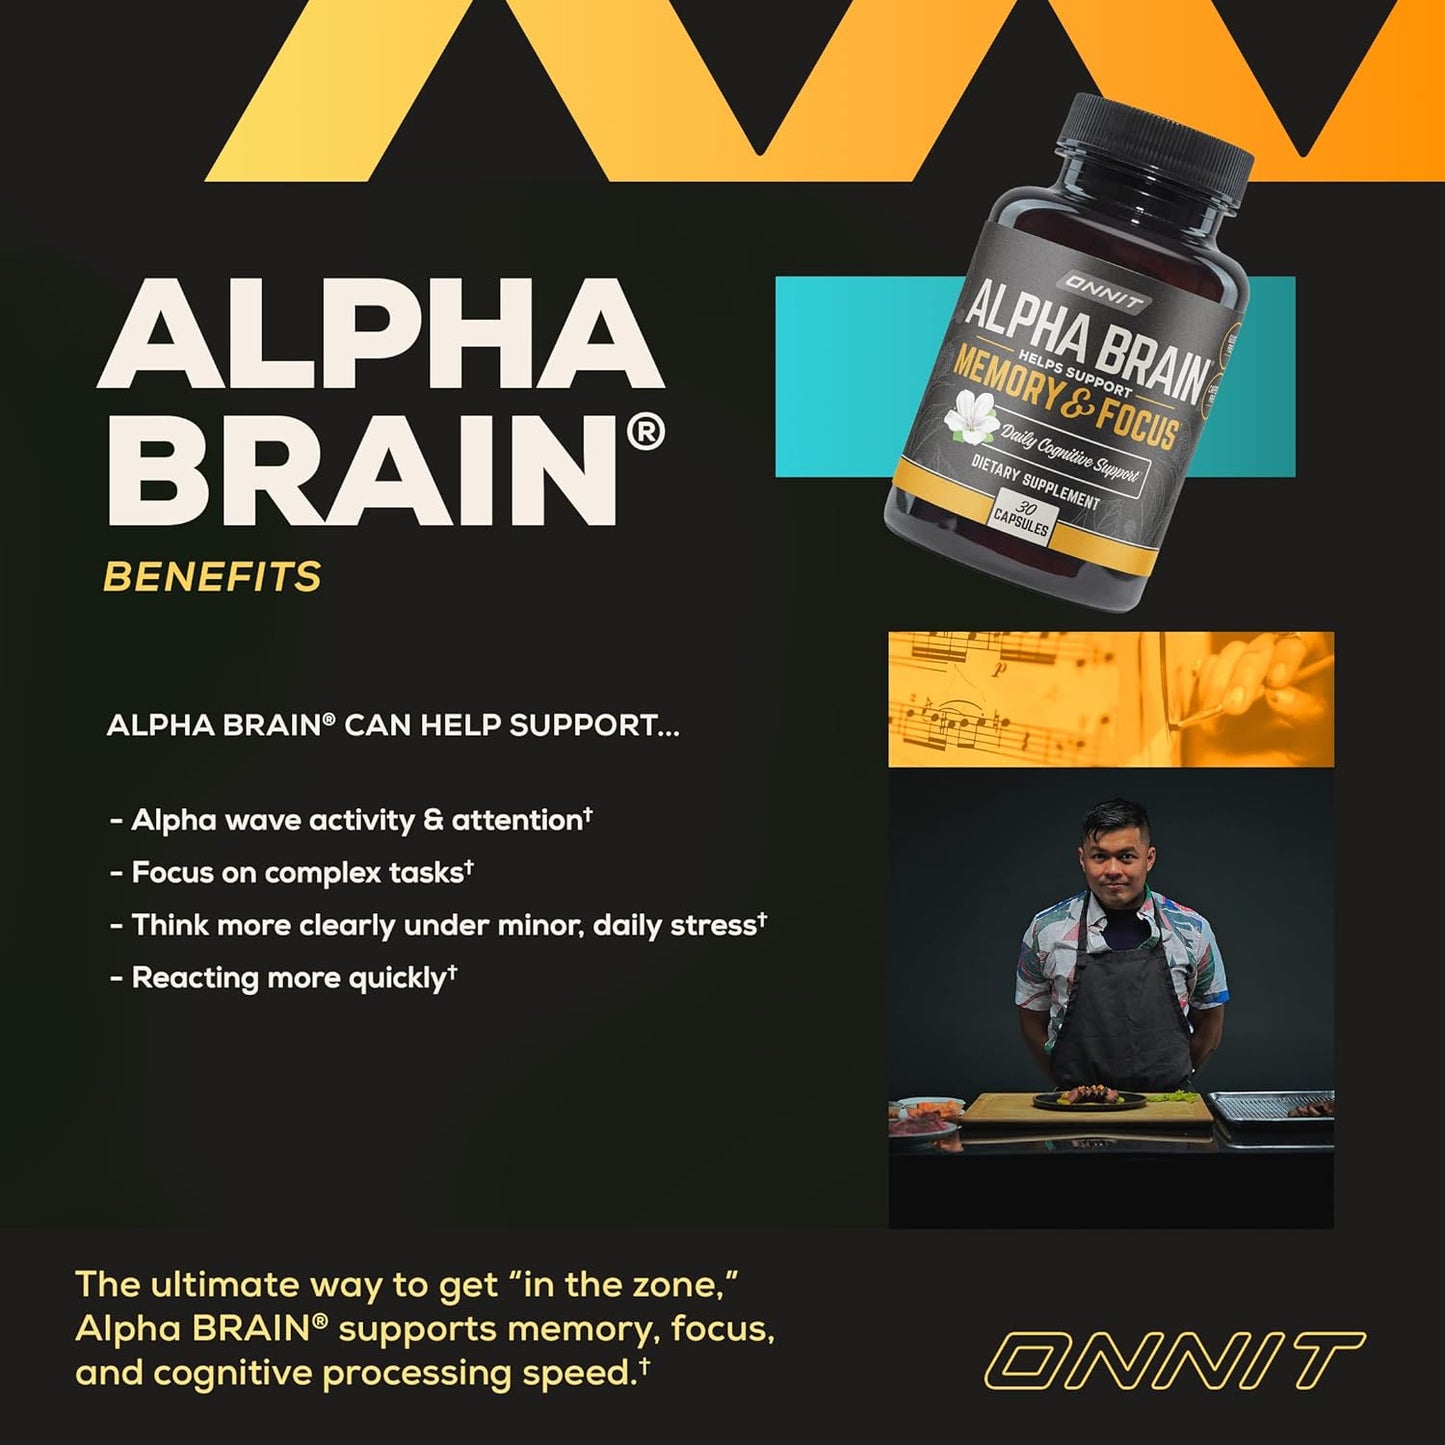 ONNIT Alpha Brain Premium Nootropic Brain Supplement, 30 Count, for Men & Women - Caffeine-Free Focus Capsules for Concentration, Brain Booster& Memory Support